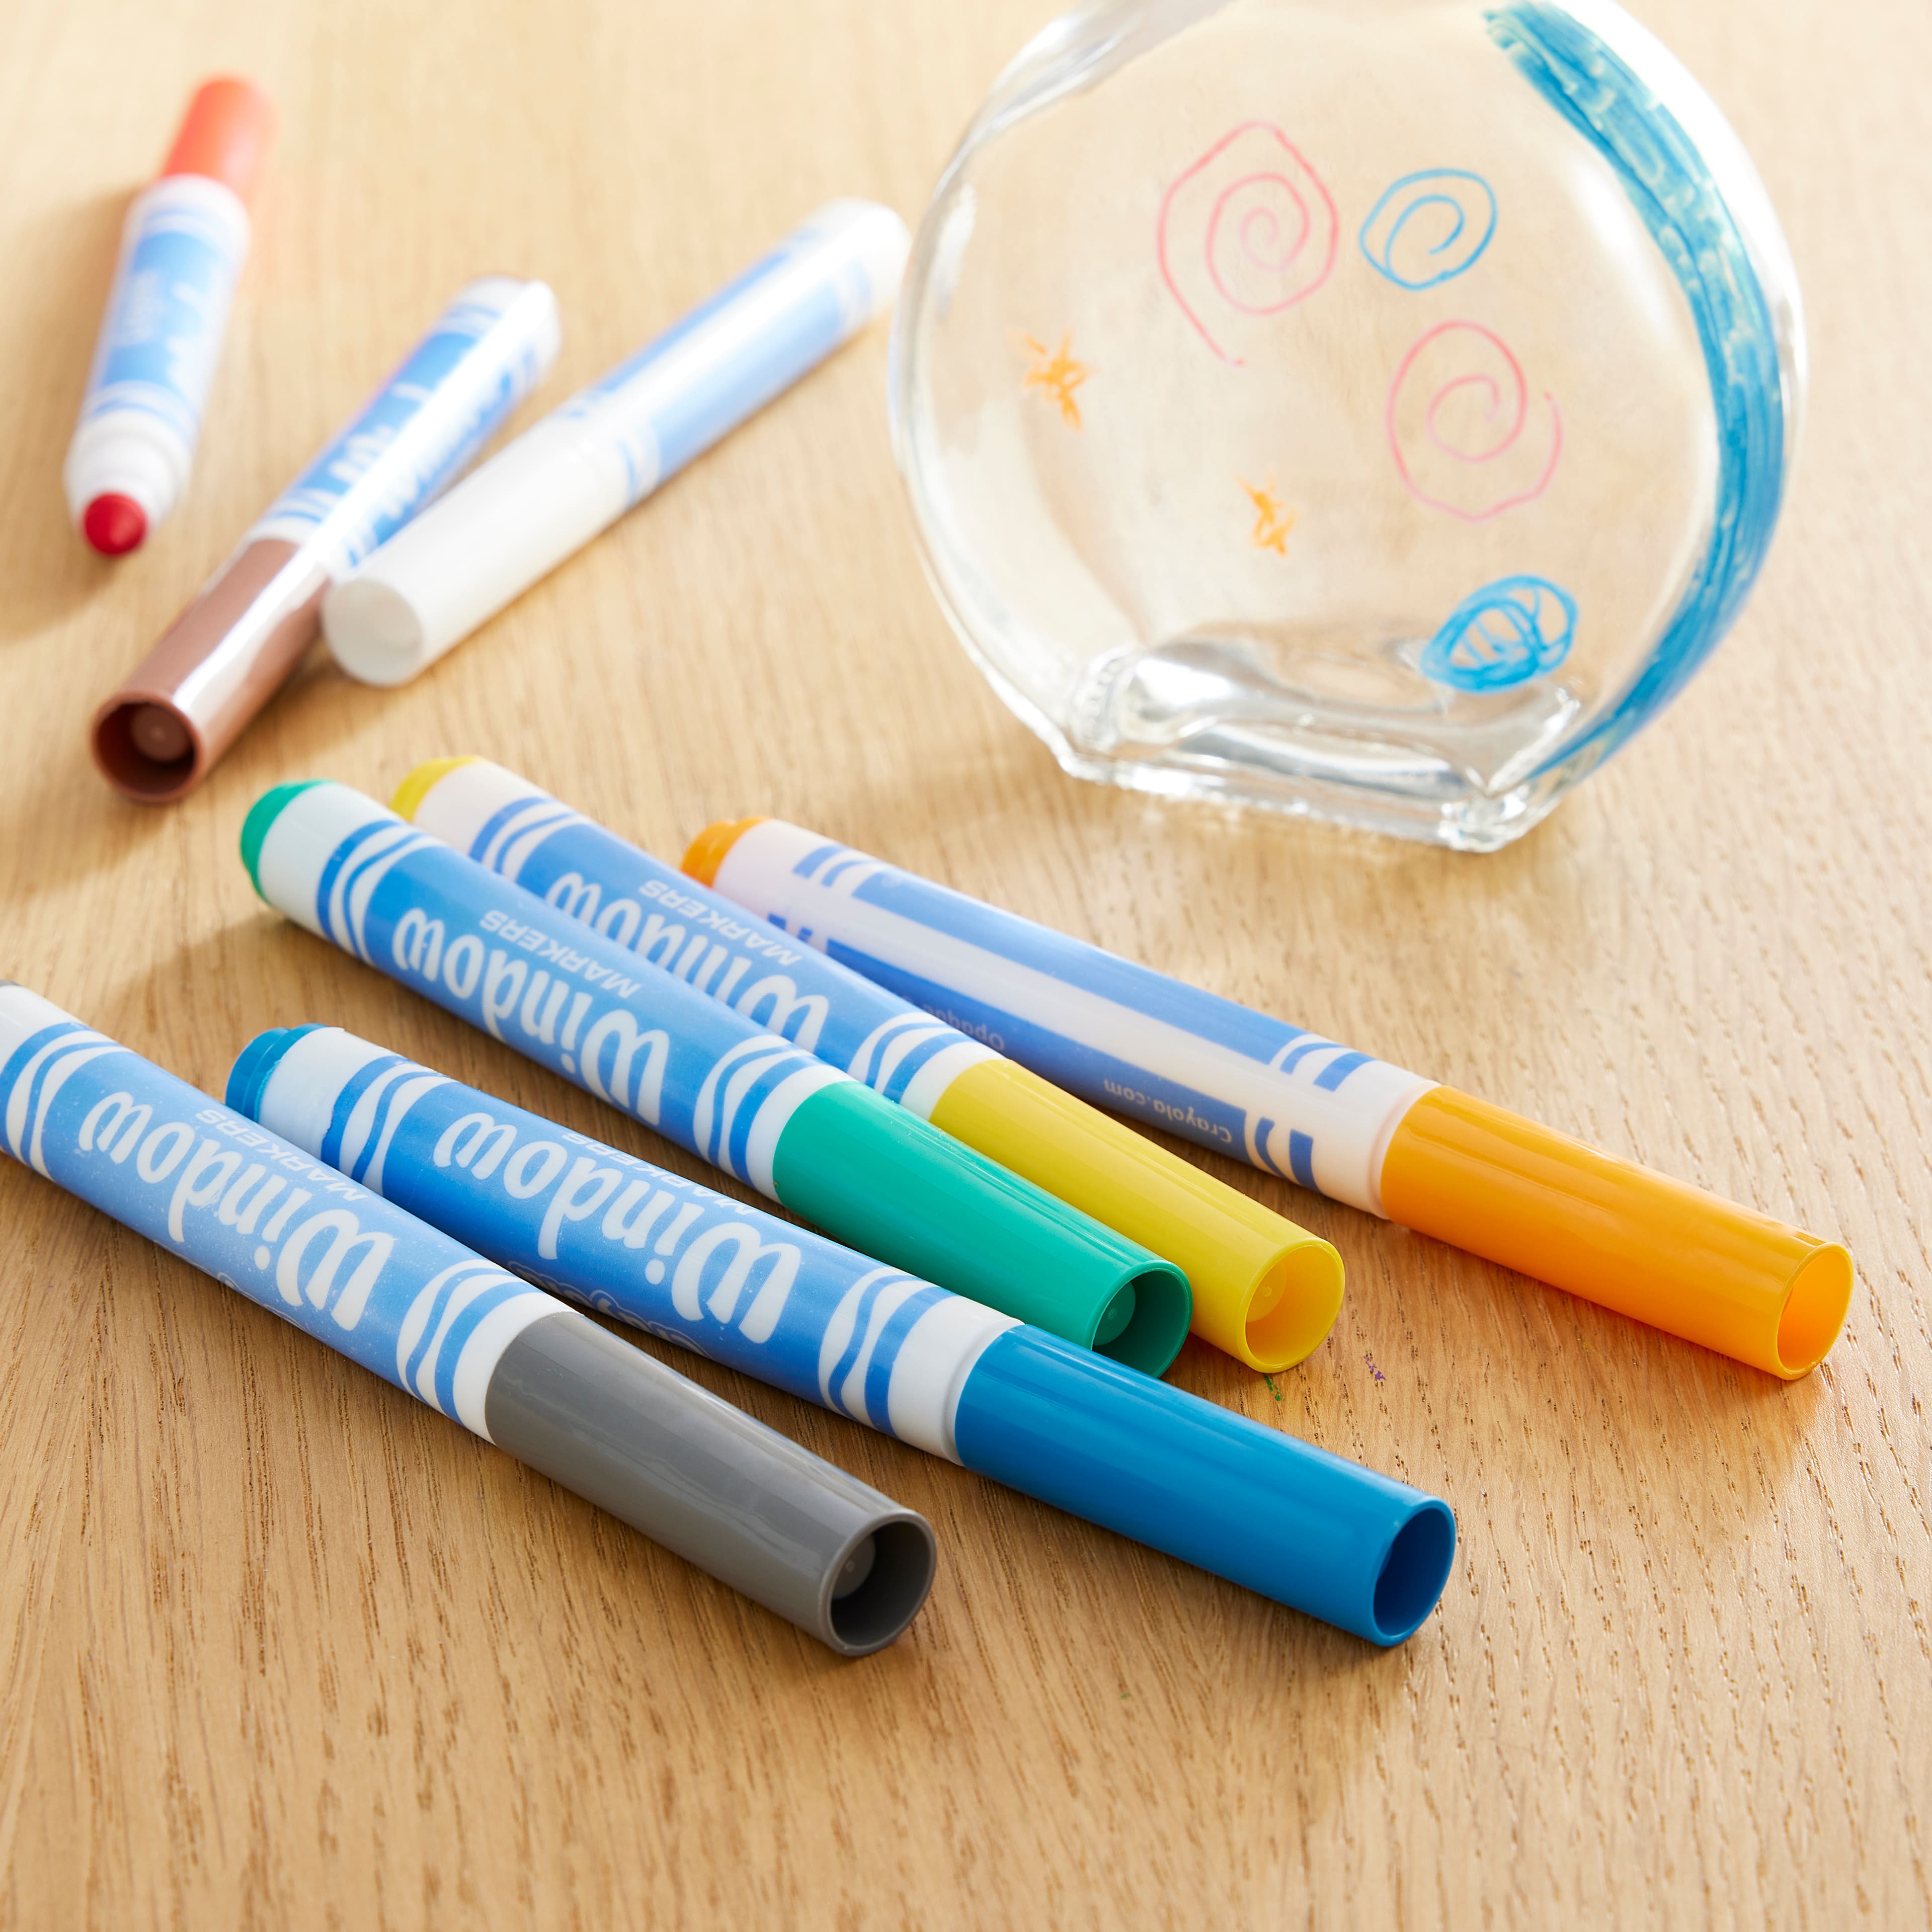 8 Count Crayola Window Markers: What's Inside the Box